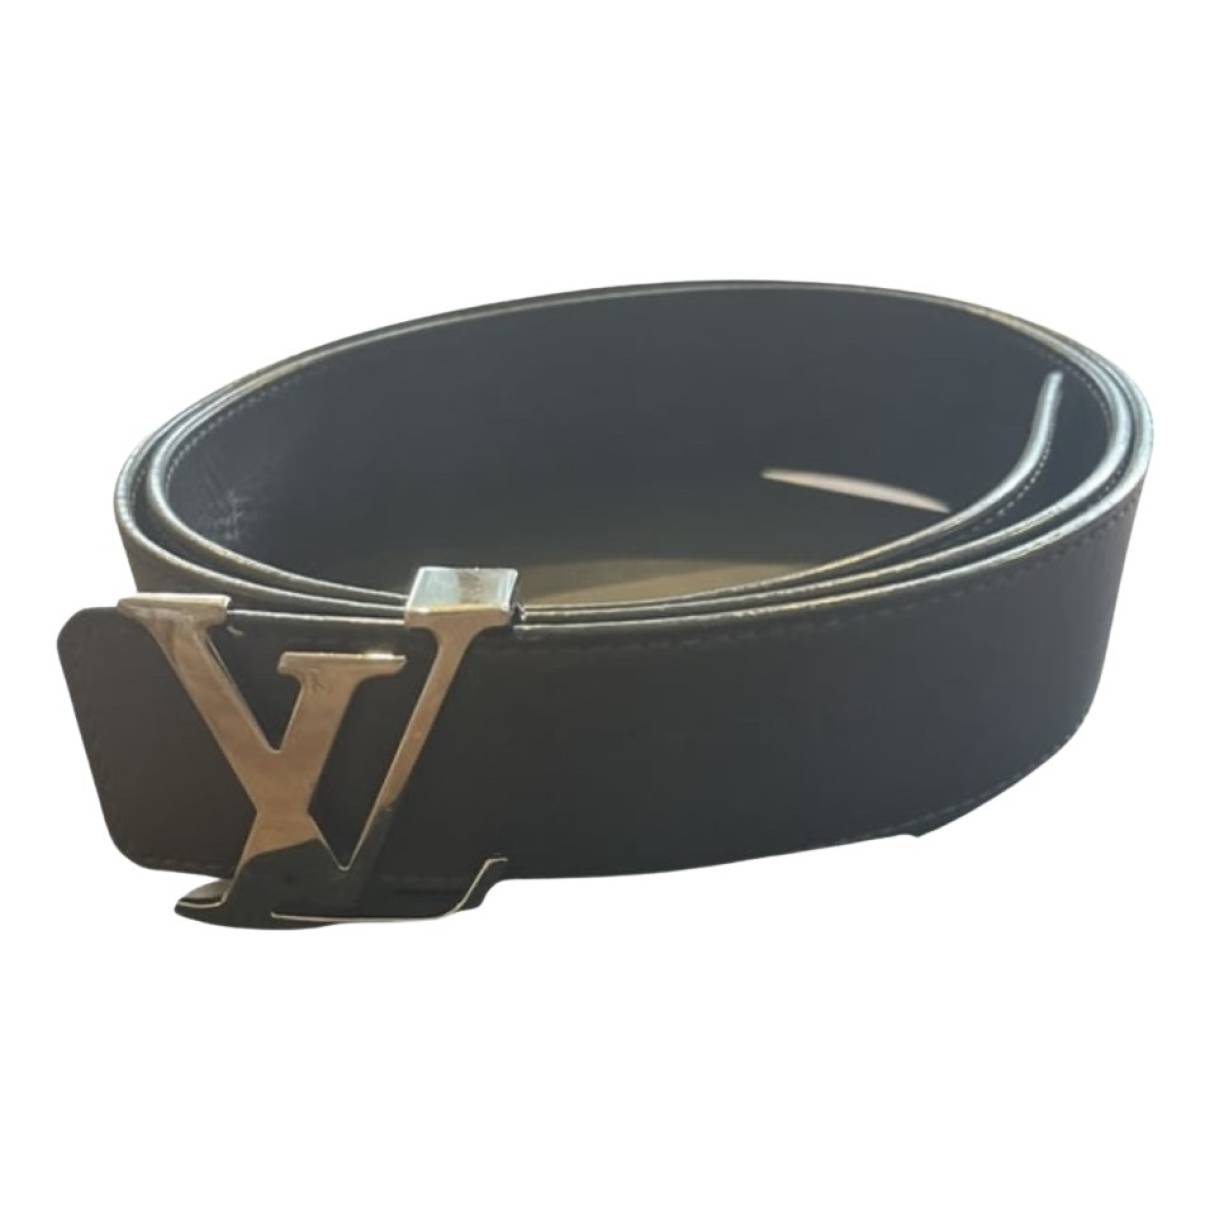 Lv circle leather belt Louis Vuitton Black size 100 cm in Leather